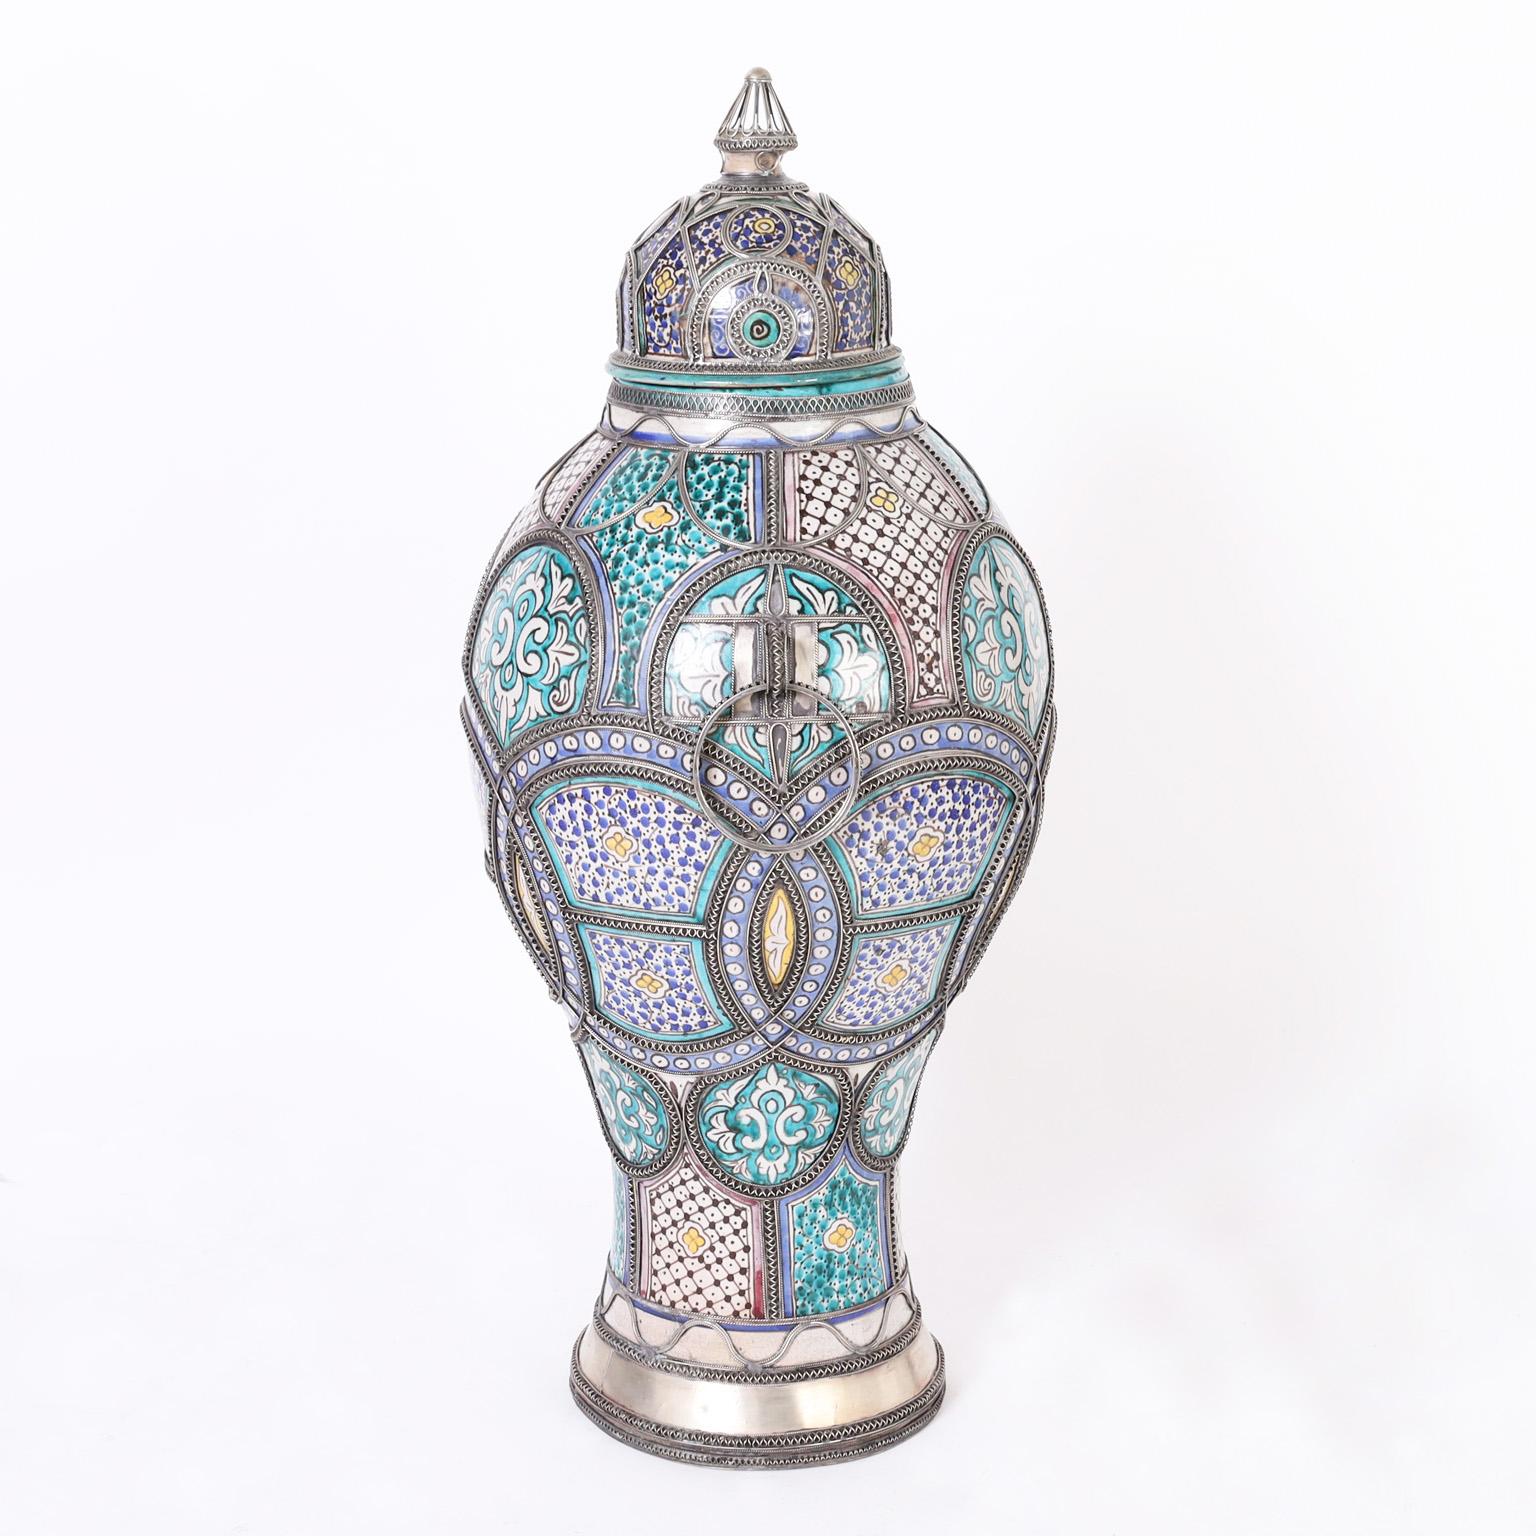 Large and impressive Moroccan lidded urn crafted in terra cotta, glazed over mediterranean colors and decorated with jewelry like metal work that ups the wow factor.